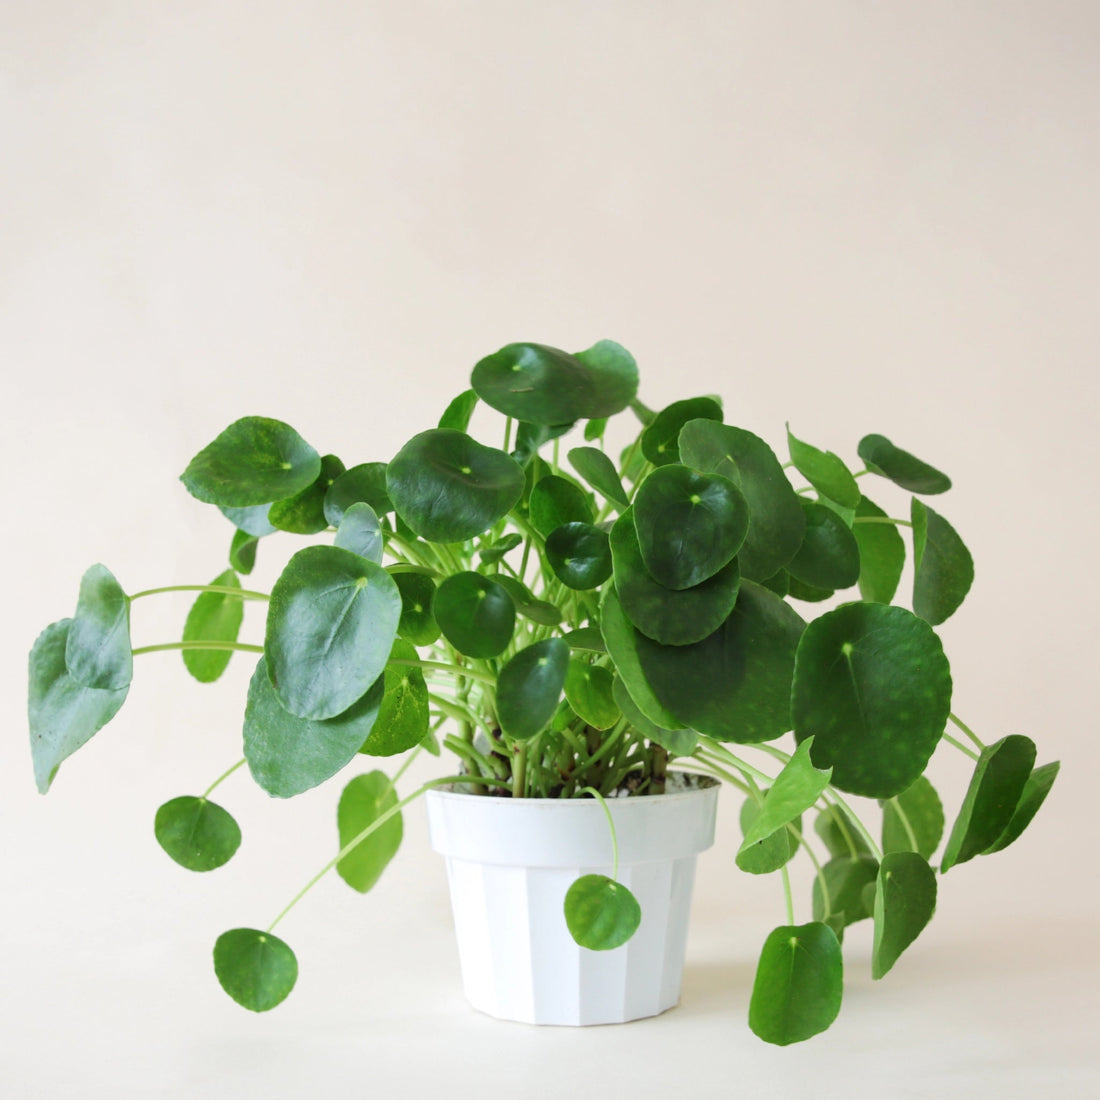 4” Pilea Peperomioides - Chinese Money Plant